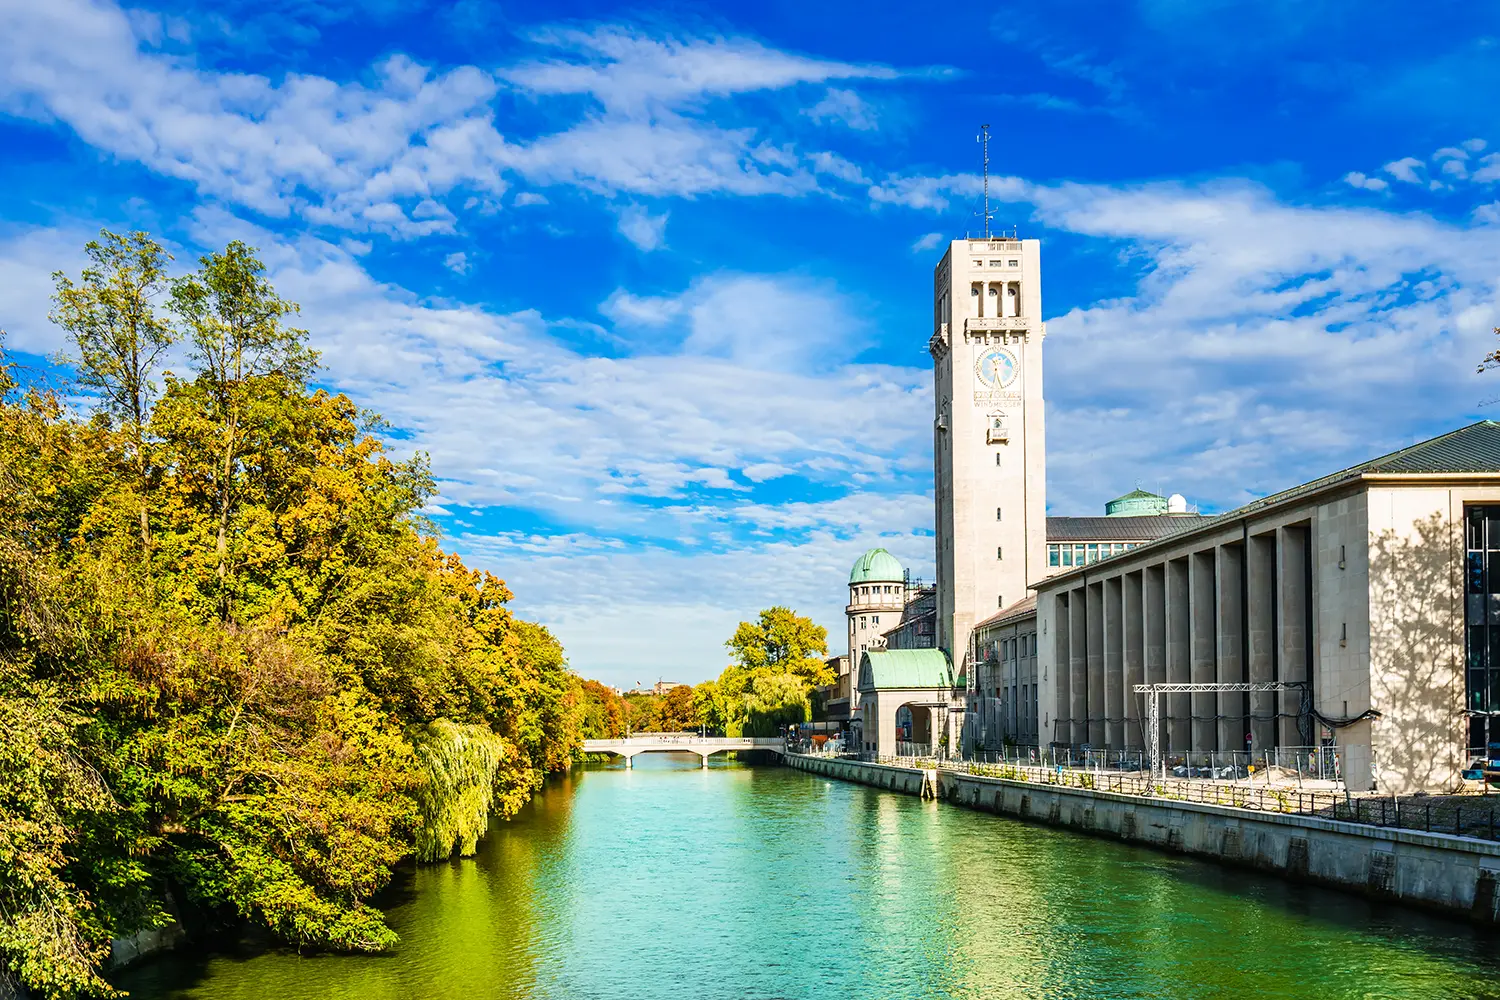 Deutsches Museum in Munich with Isar river, Germany